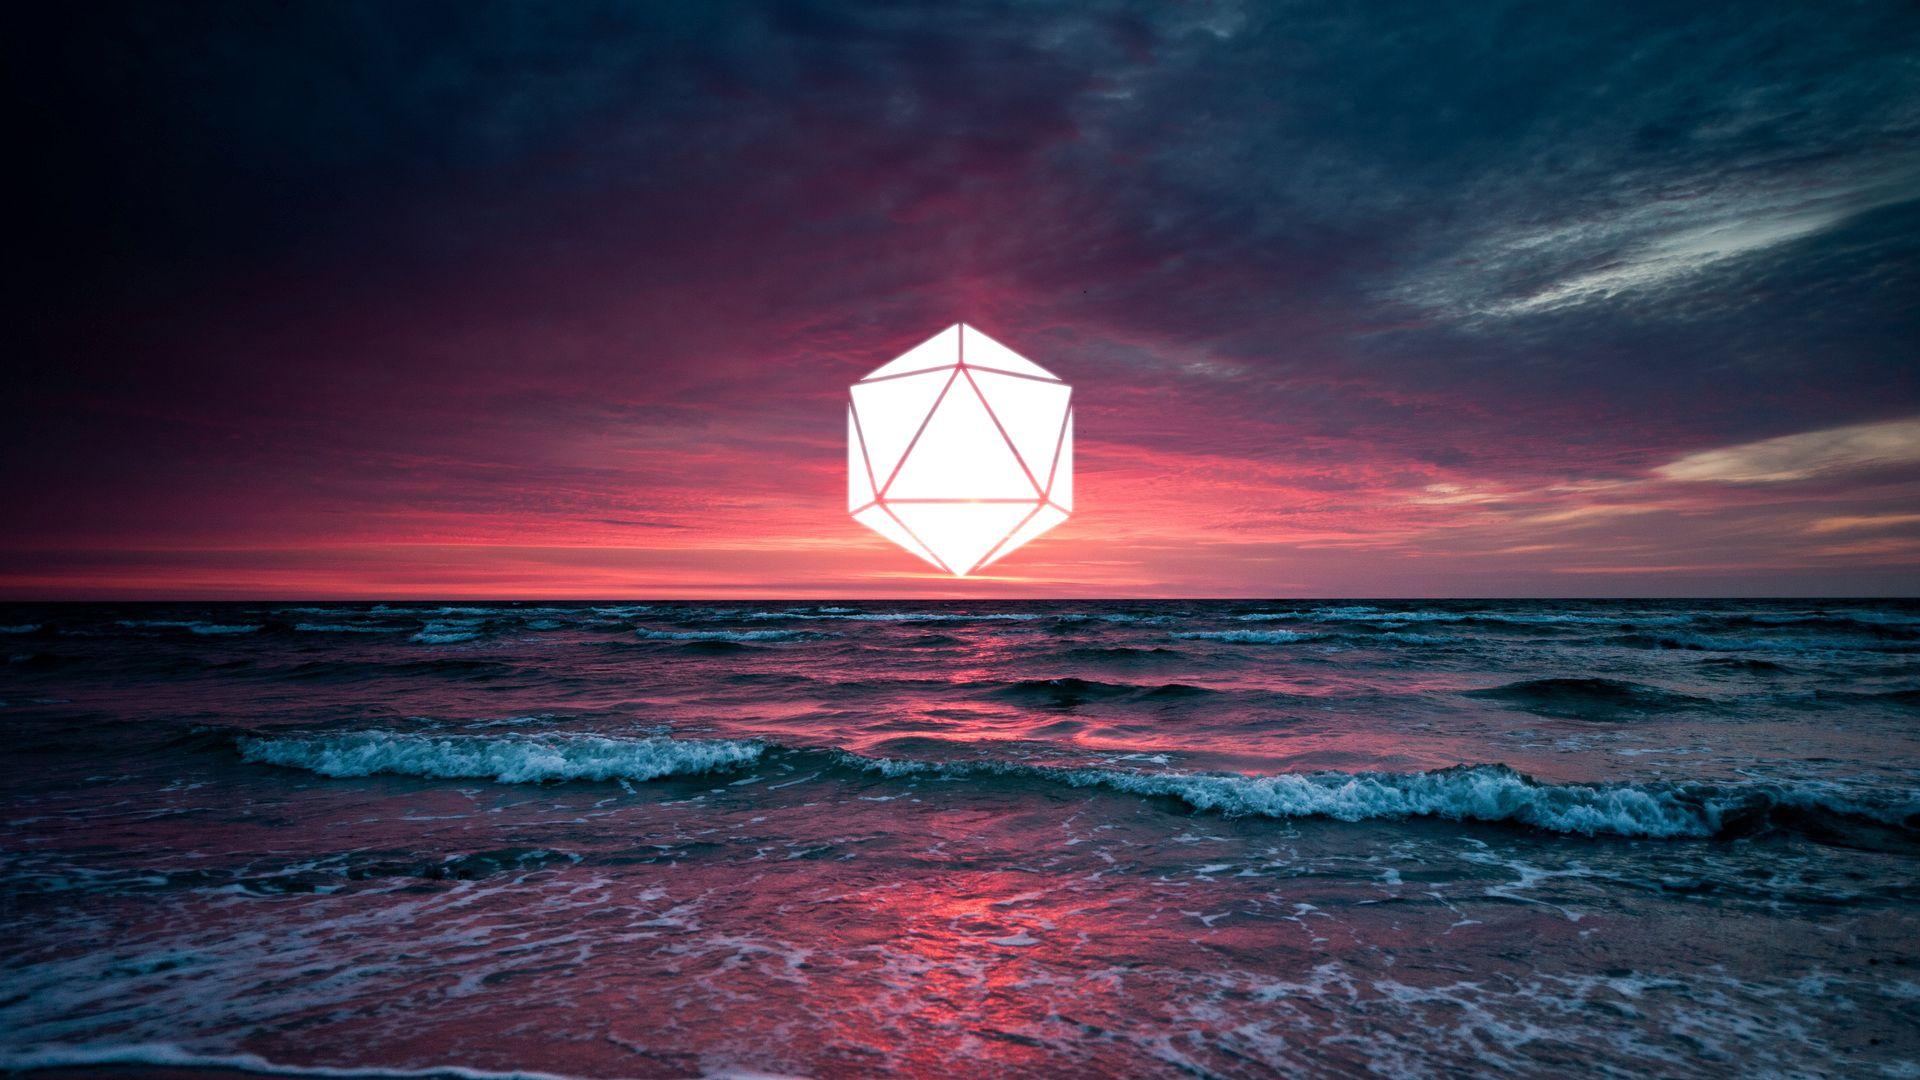 Added the Odesza logo to a nice wallpaper